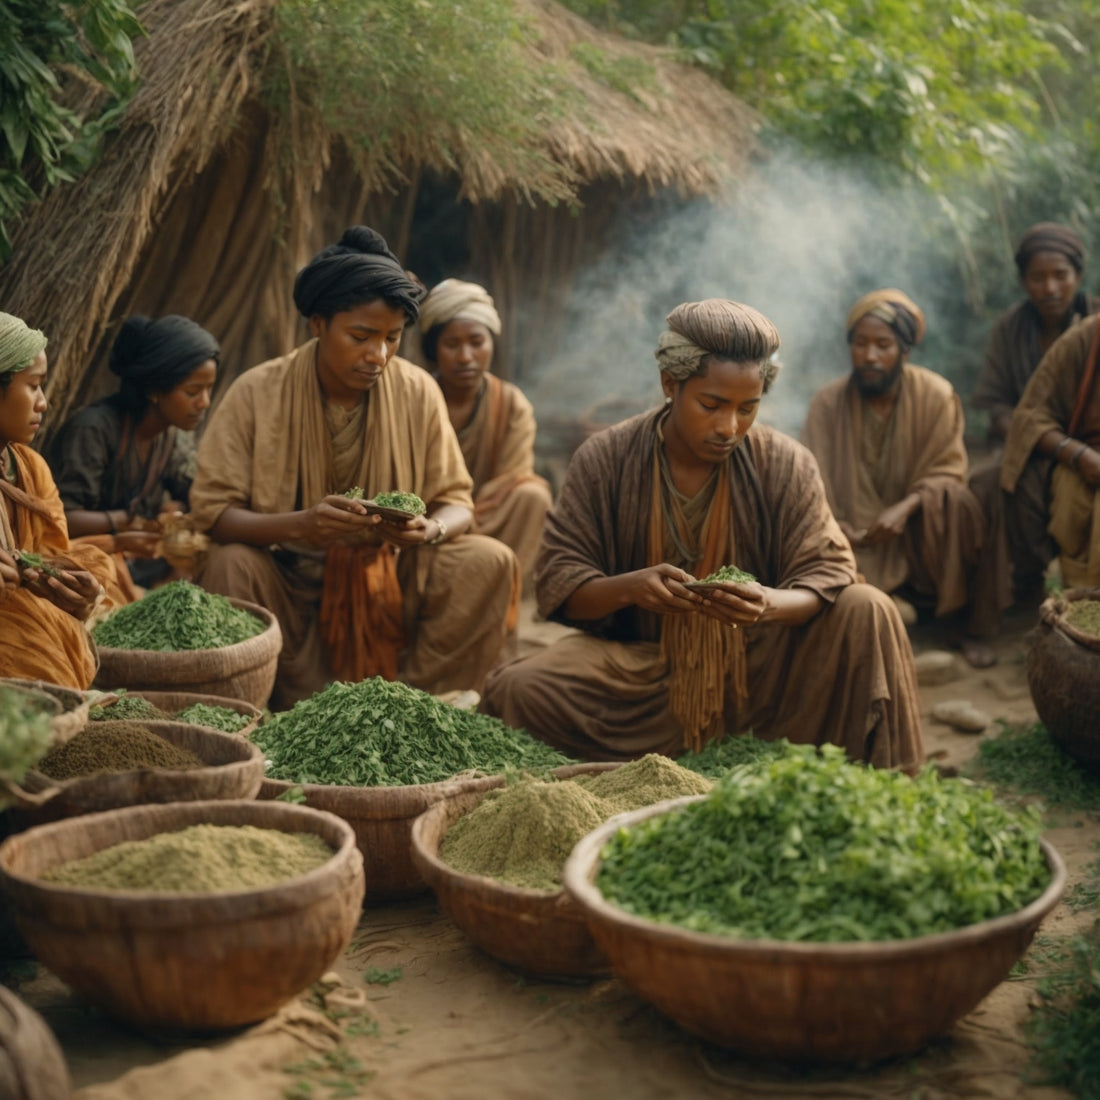 Healing Herbs in Ancient Times